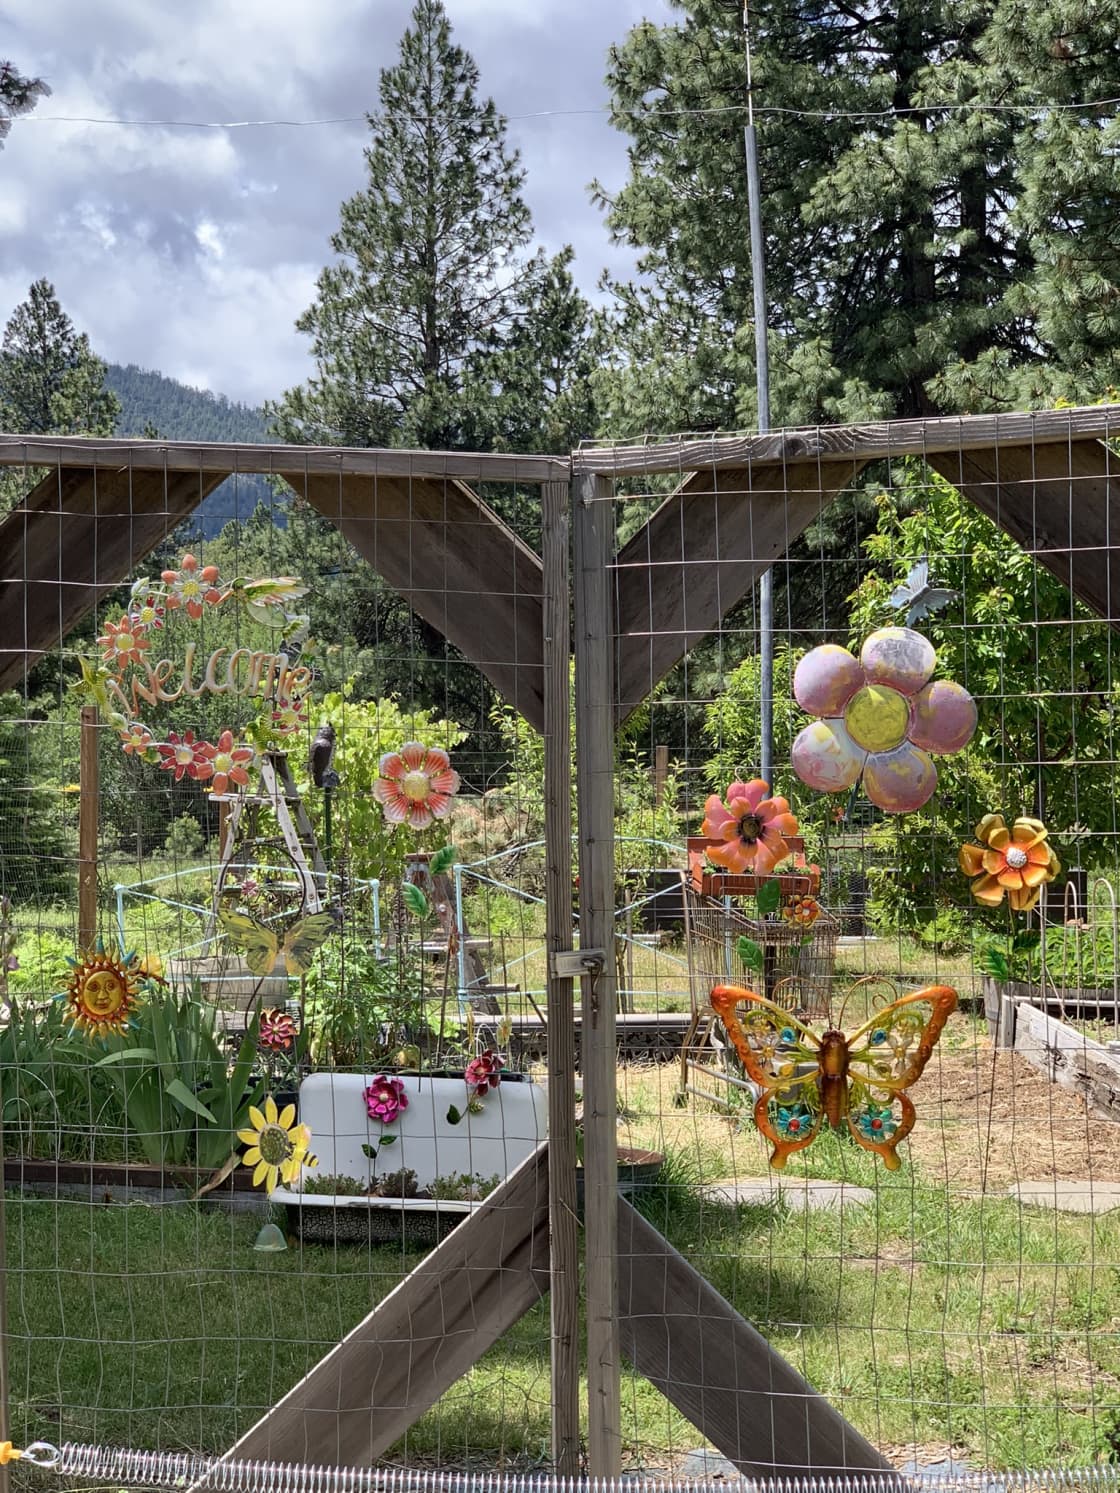 The Zinnia garden and orchard located at camp